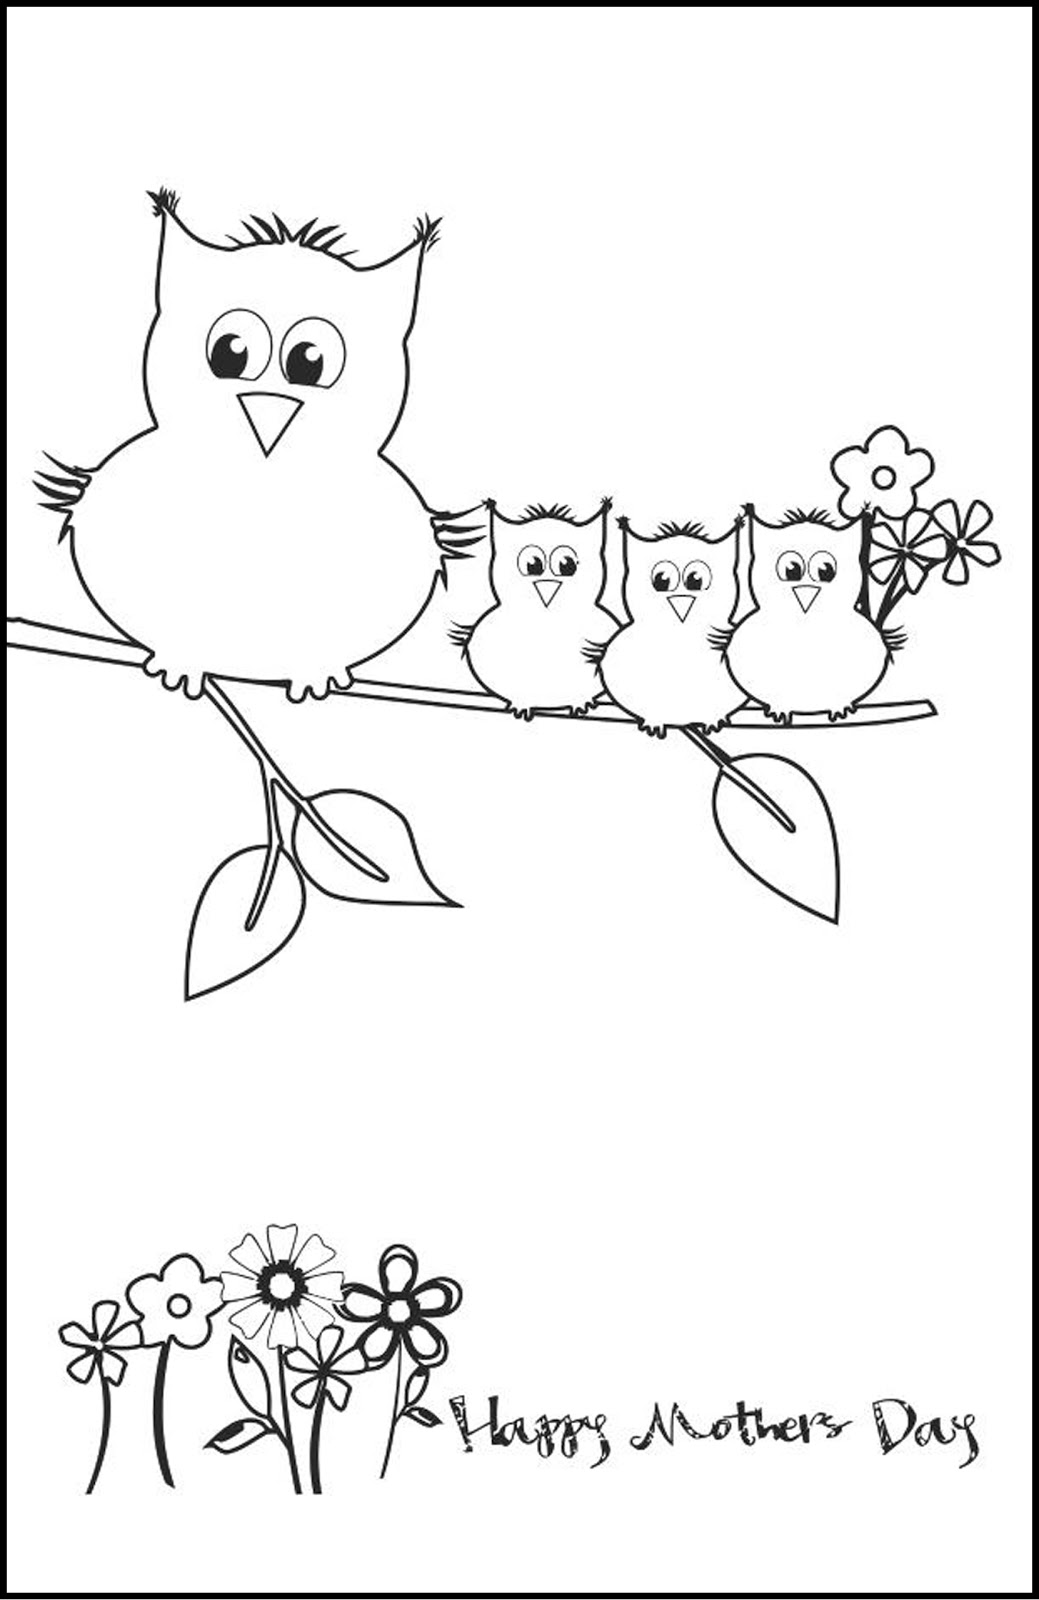 Fantail Digital Art FREE Printable Colouring card for Mothers Day!